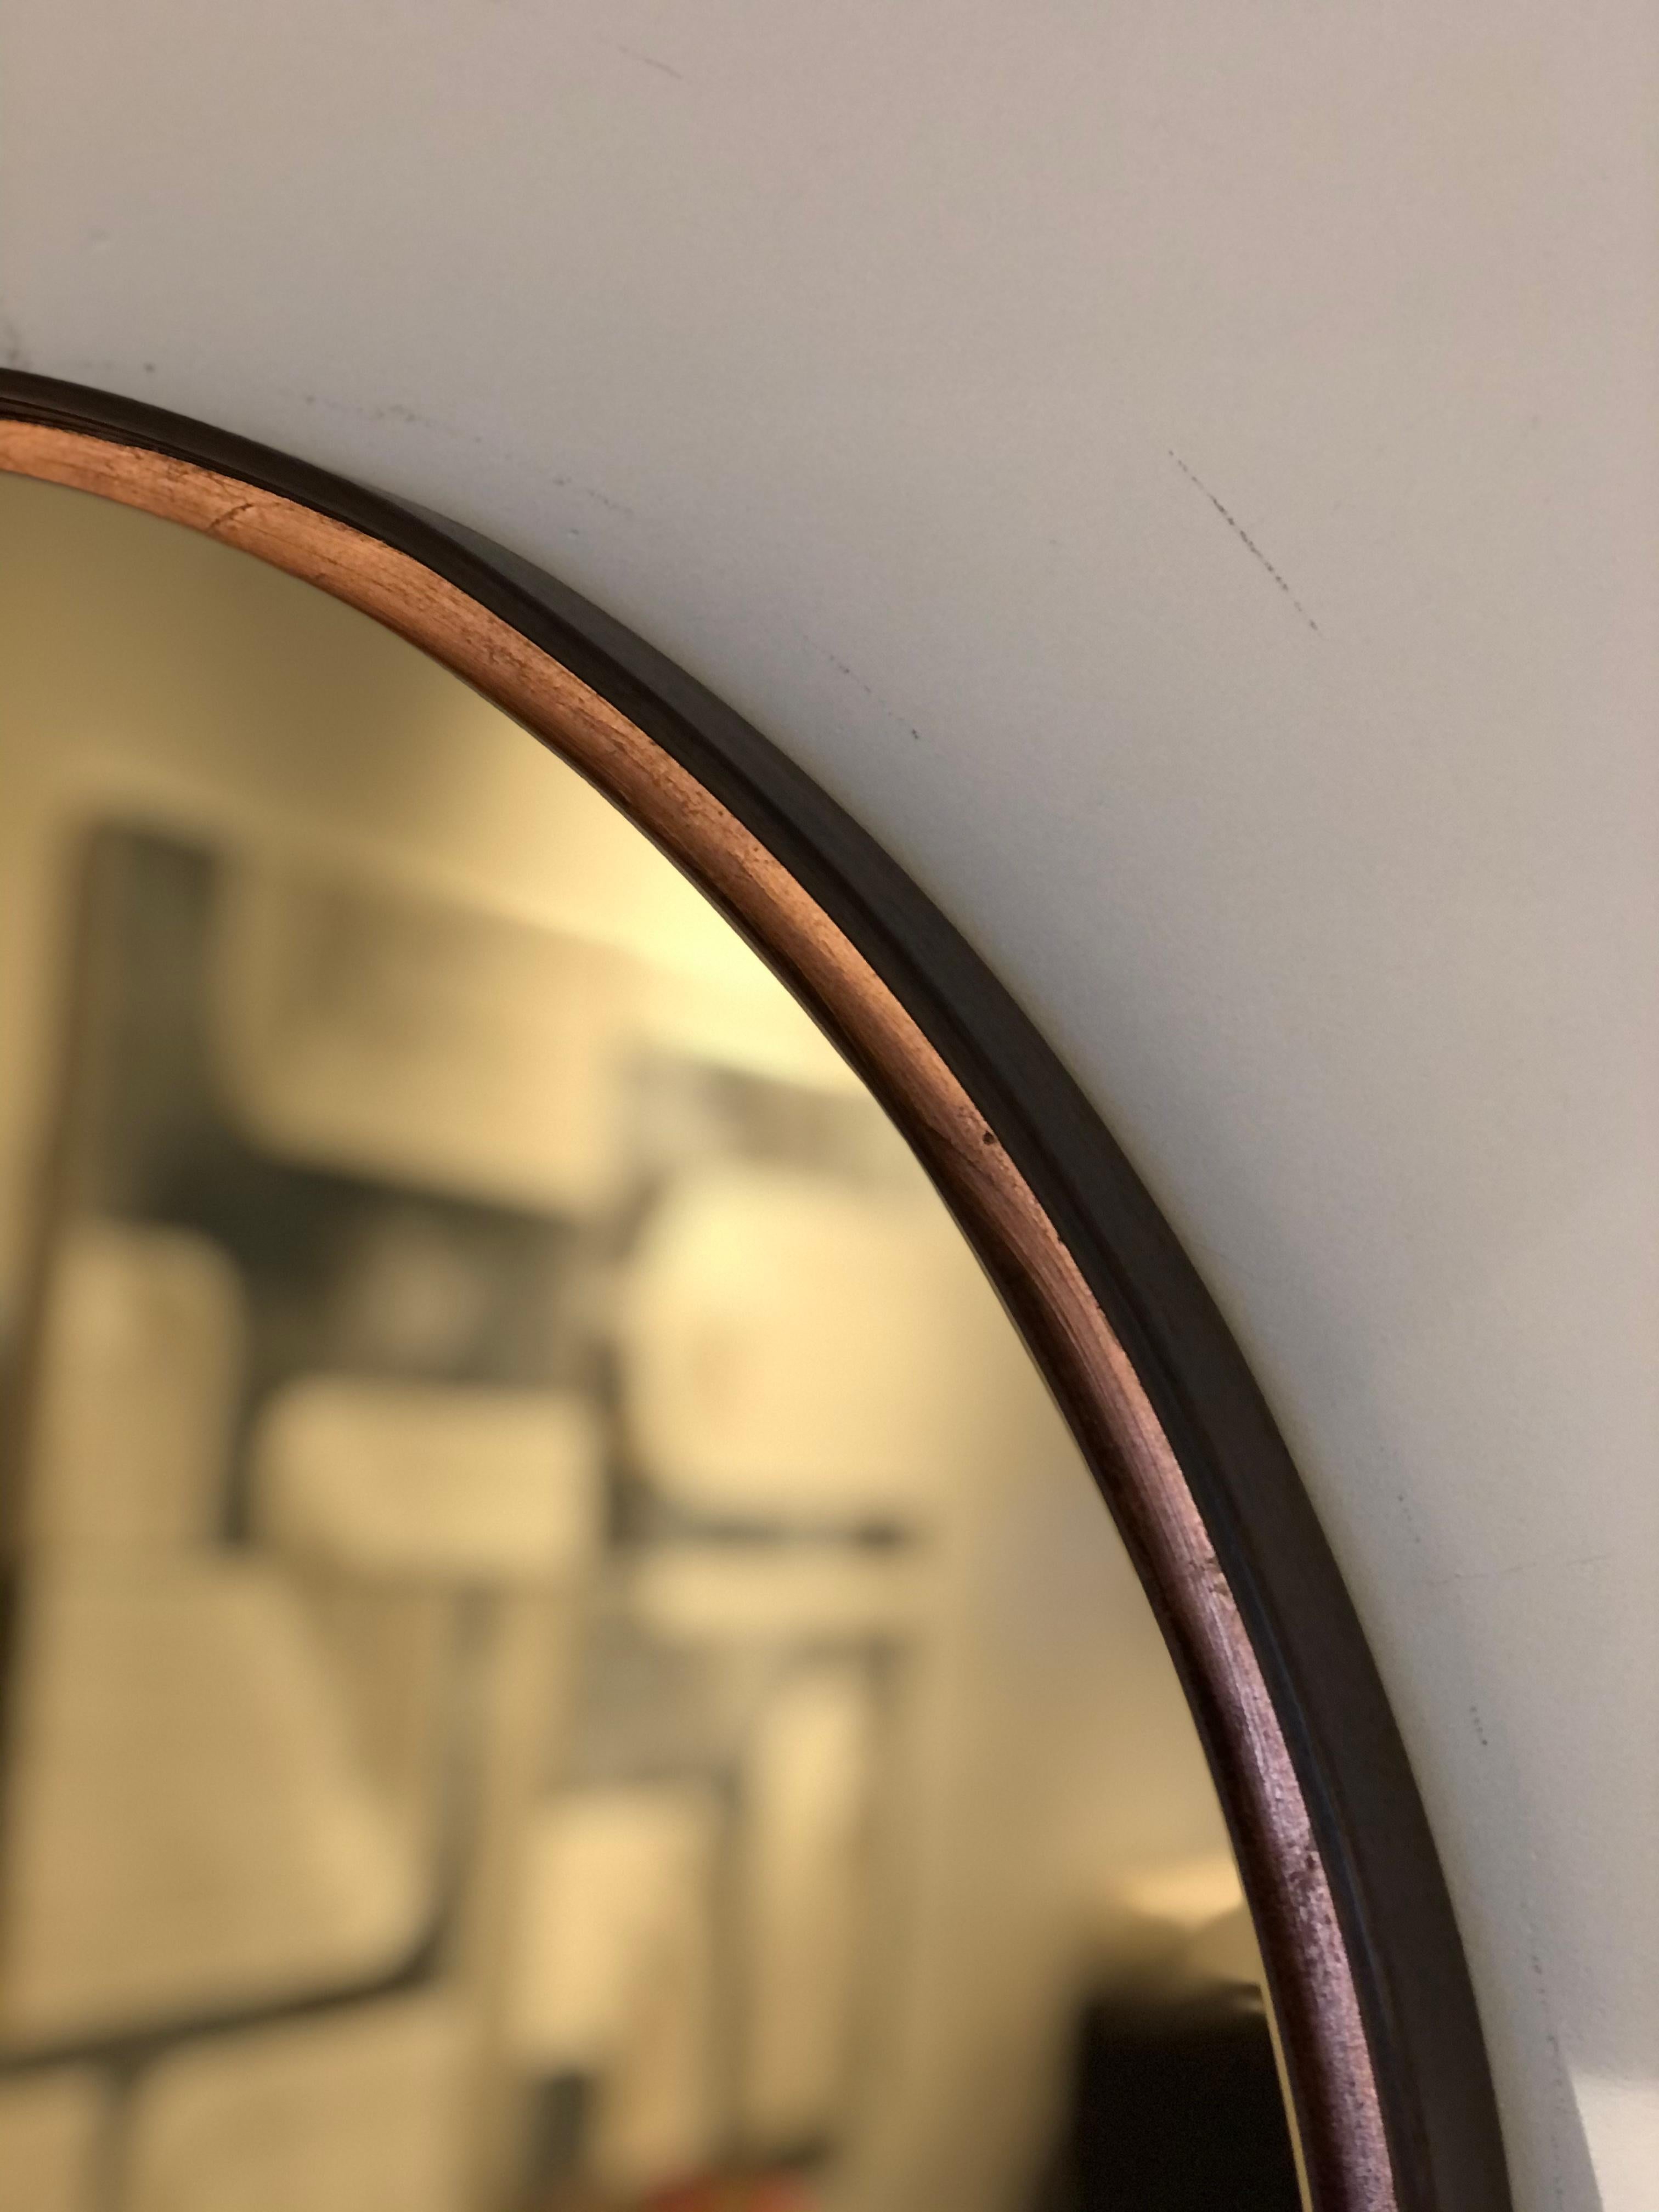 The process of wood steaming changes the cellular structure of wood to make it more pliable, once clamped to a form it takes it shape. The bronze mirror is set in to reveal a hand applied copper leaf finish between frame and mirror.

Sizing 27” W